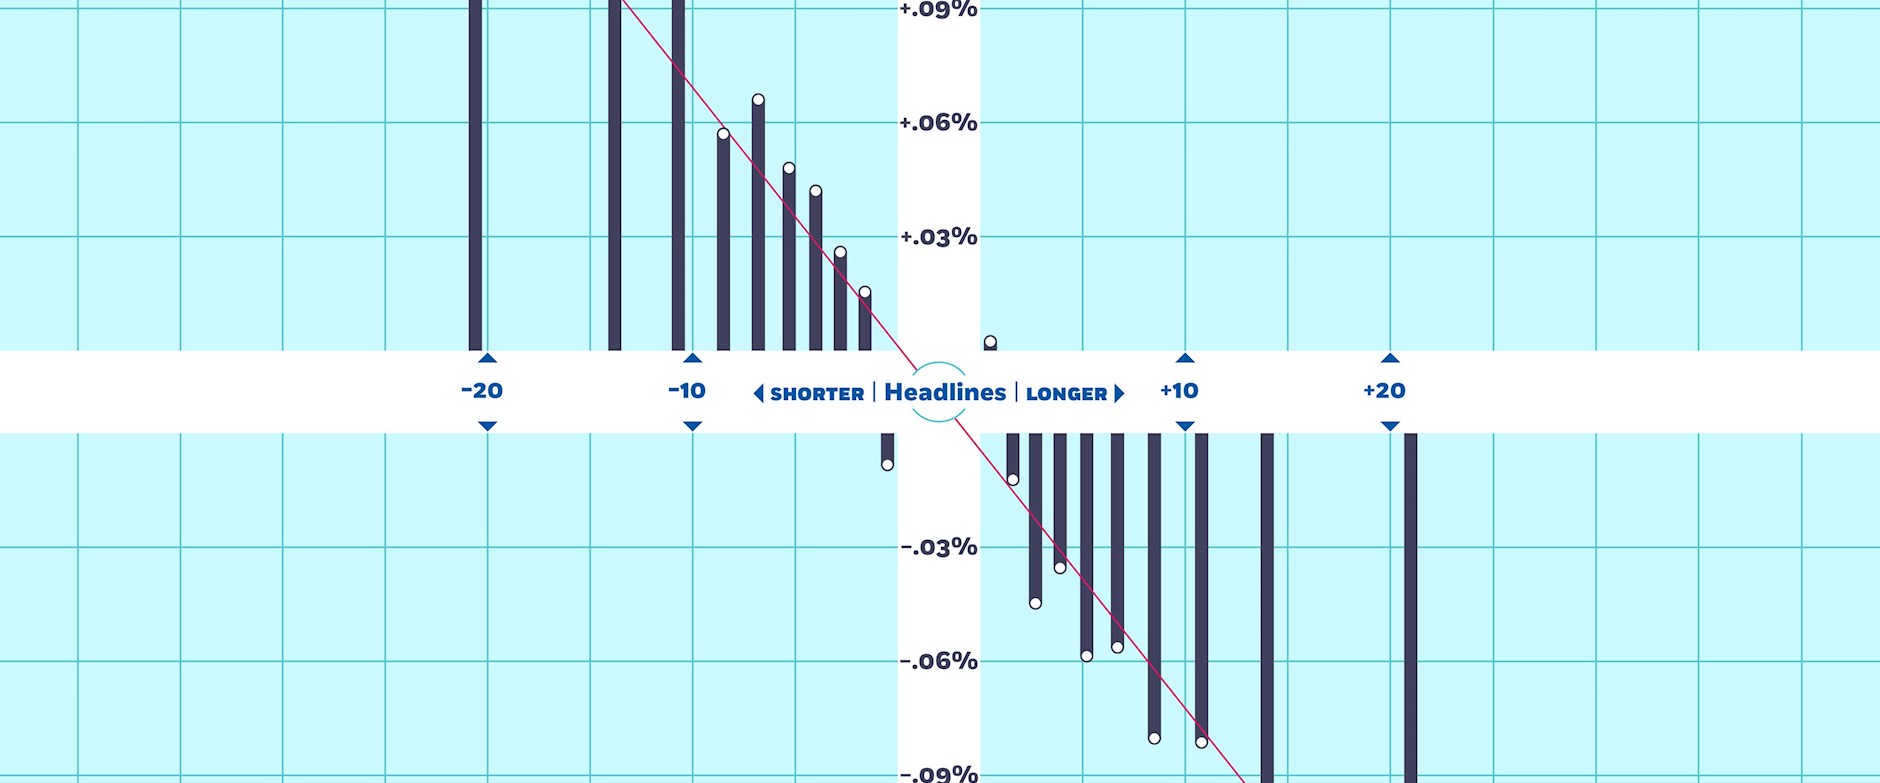 Blue grid chart about news headlines